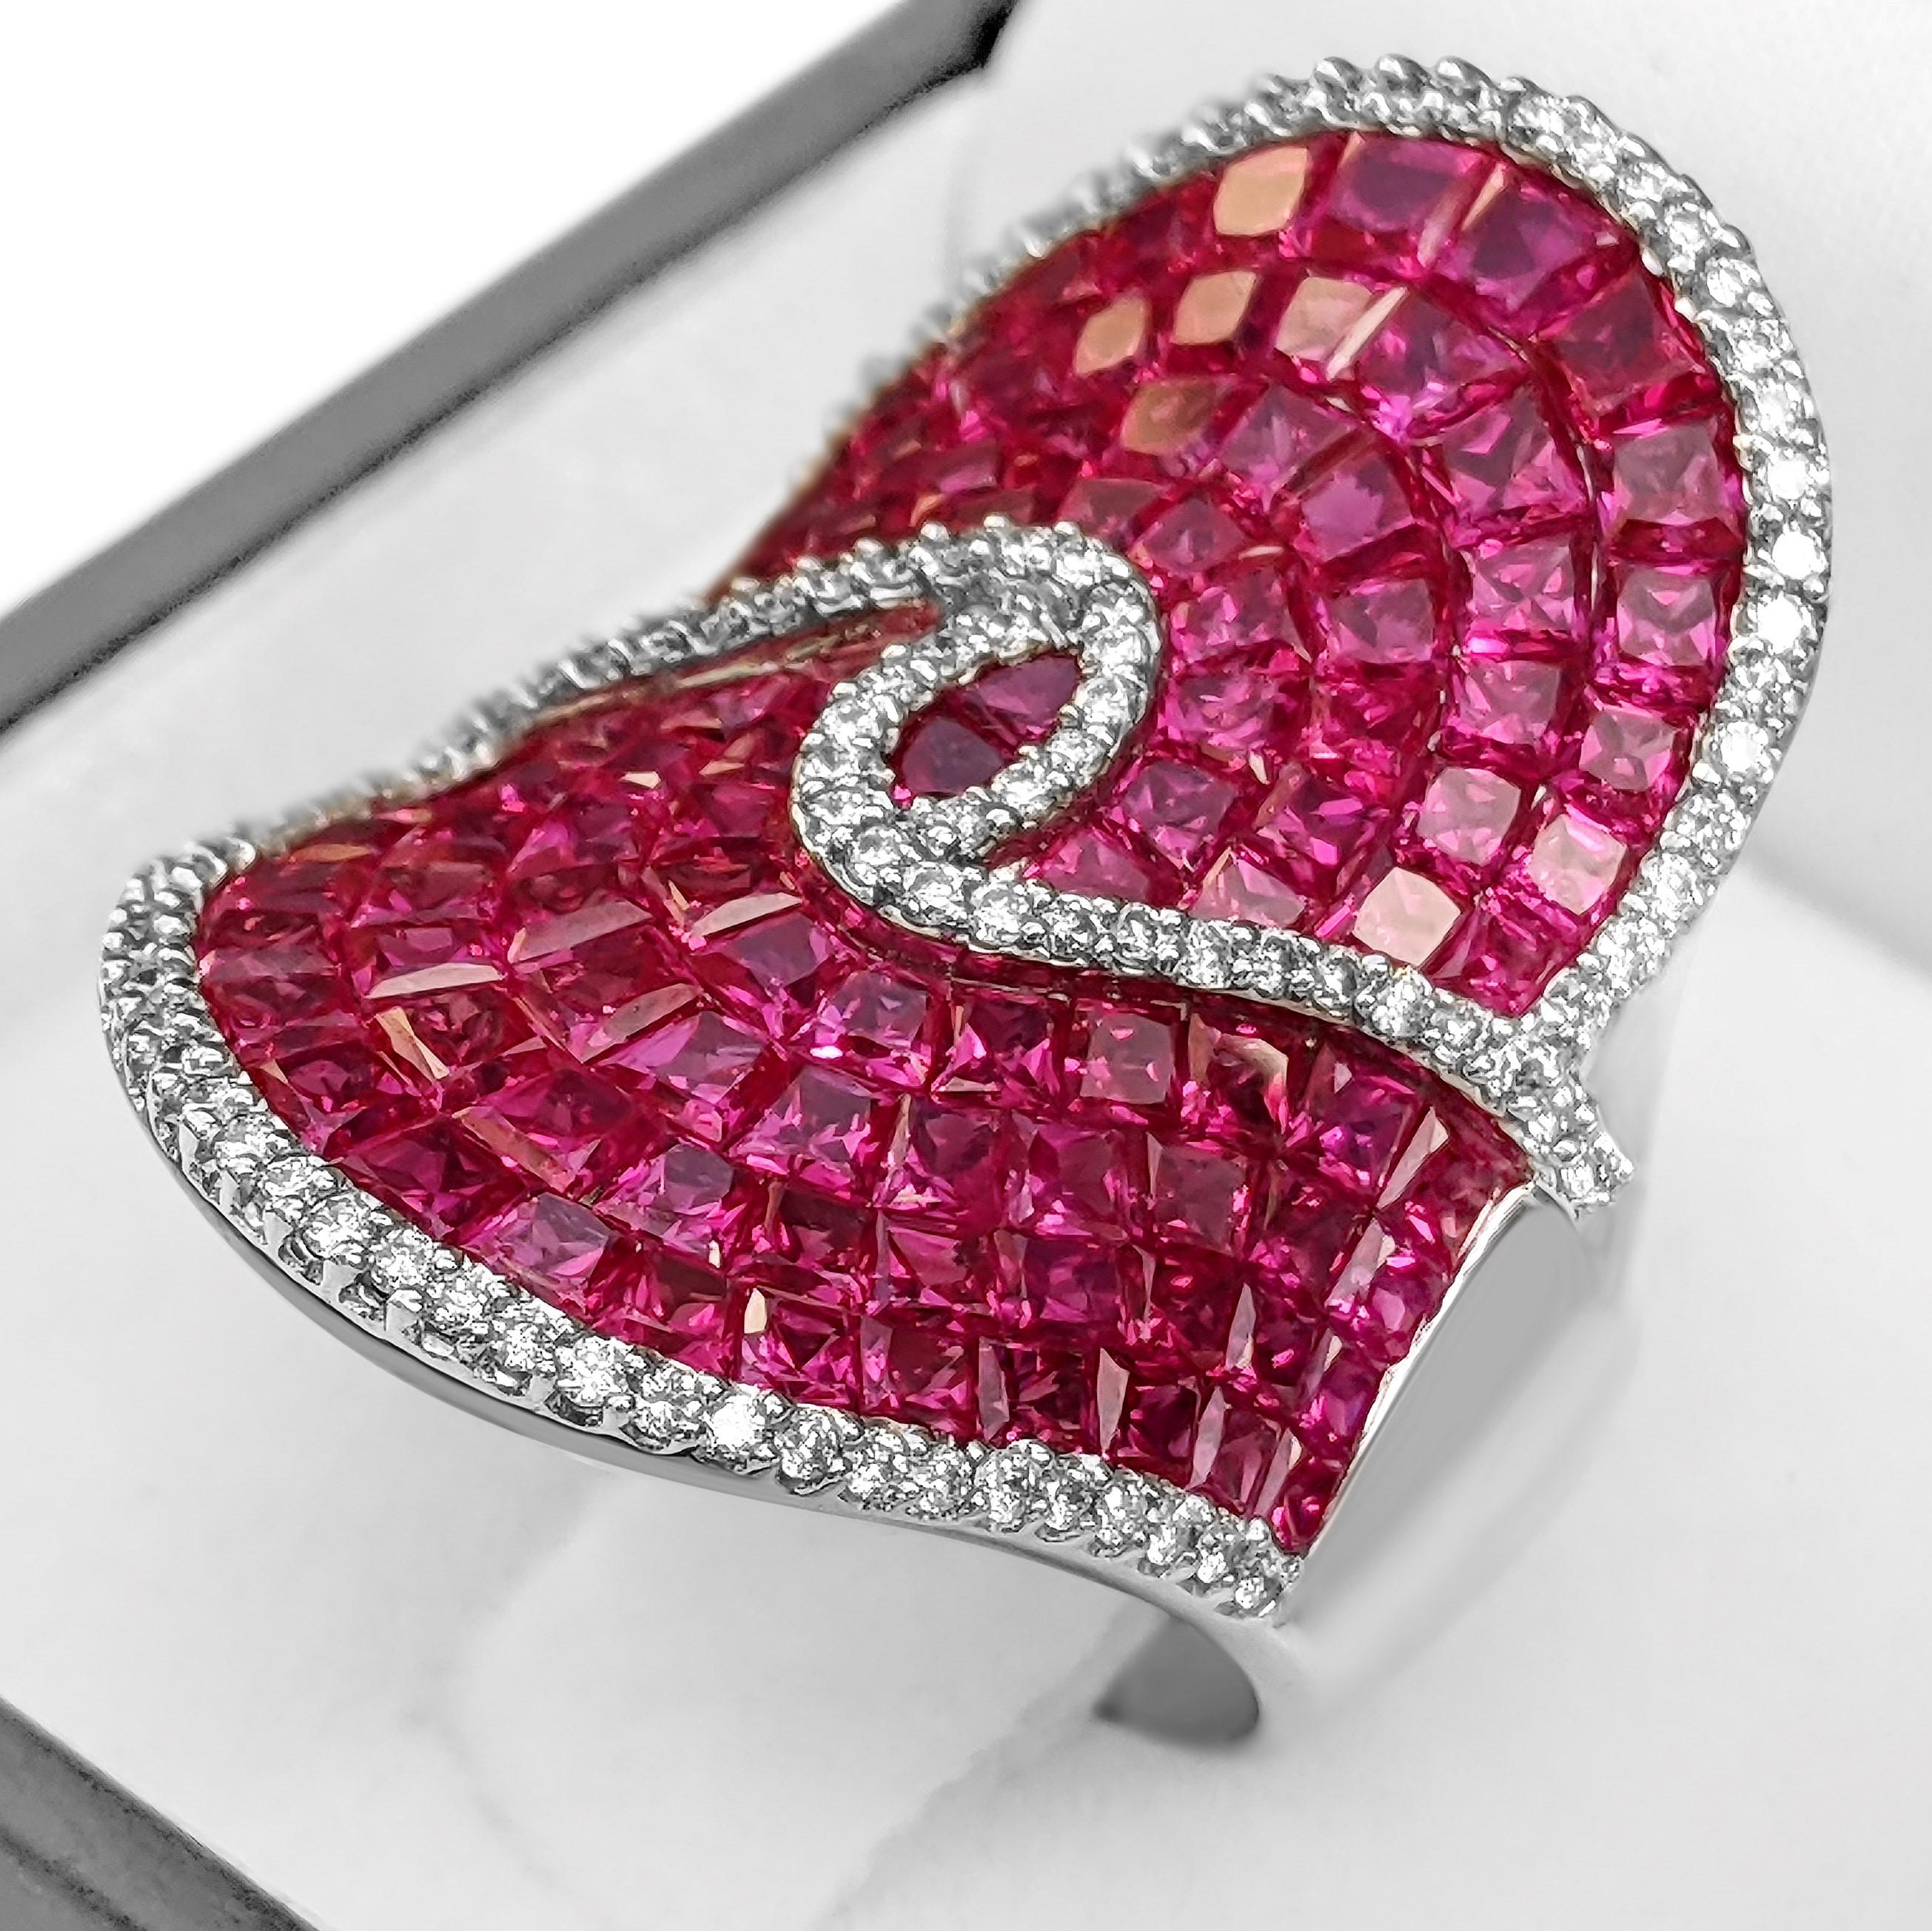 Mixed Cut NO RESERVE - AAA 8.16 Carat Red Ruby & 0.51ct Diamonds, 18K White Gold Ring